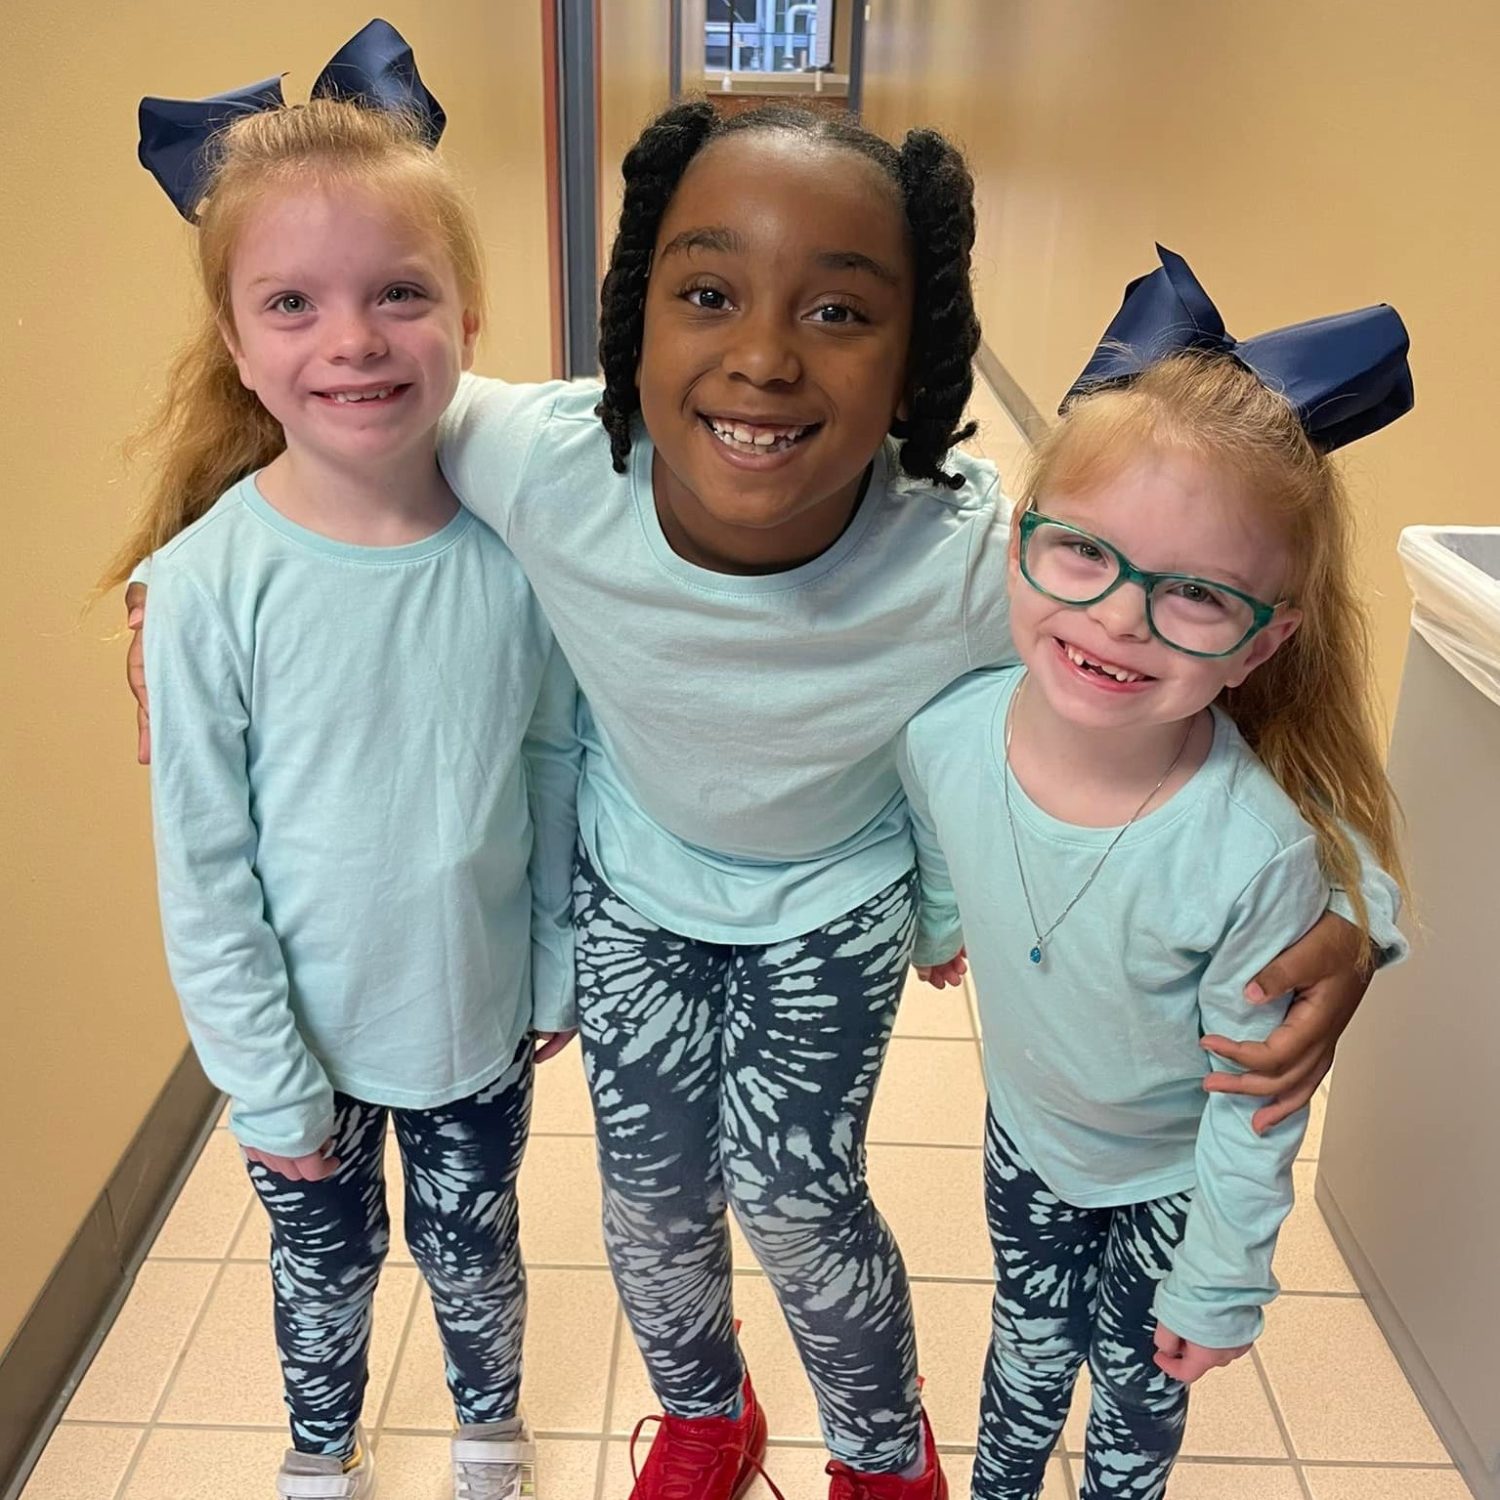 Three students smile for the camera while wearing matching outfits.